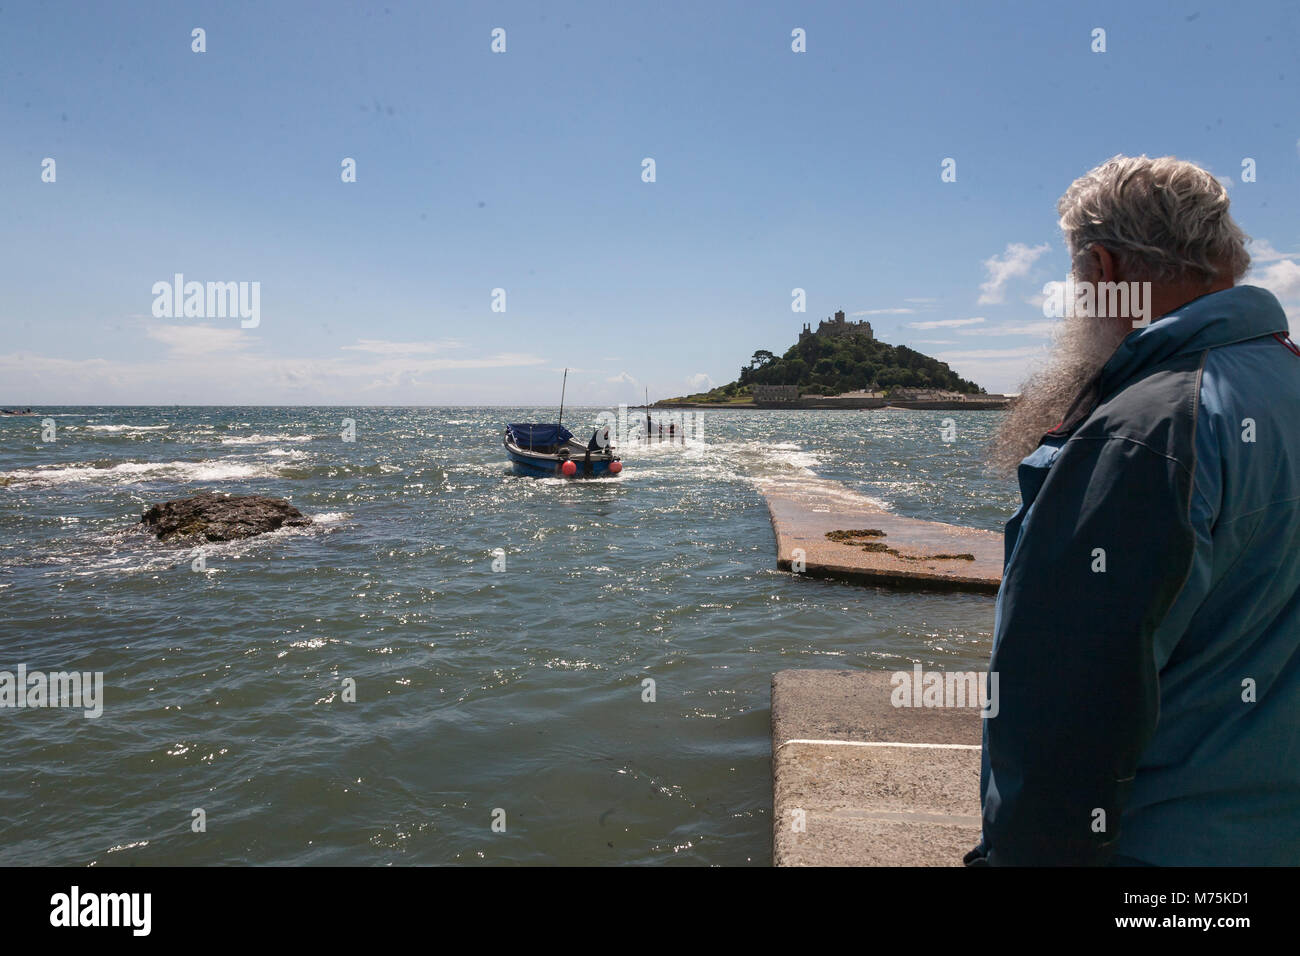 St Michaels Mount, England, July 21, 2010: An elderly man waiting for a boat taking tourist to St Michaels Mount in Cornwall. Stock Photo